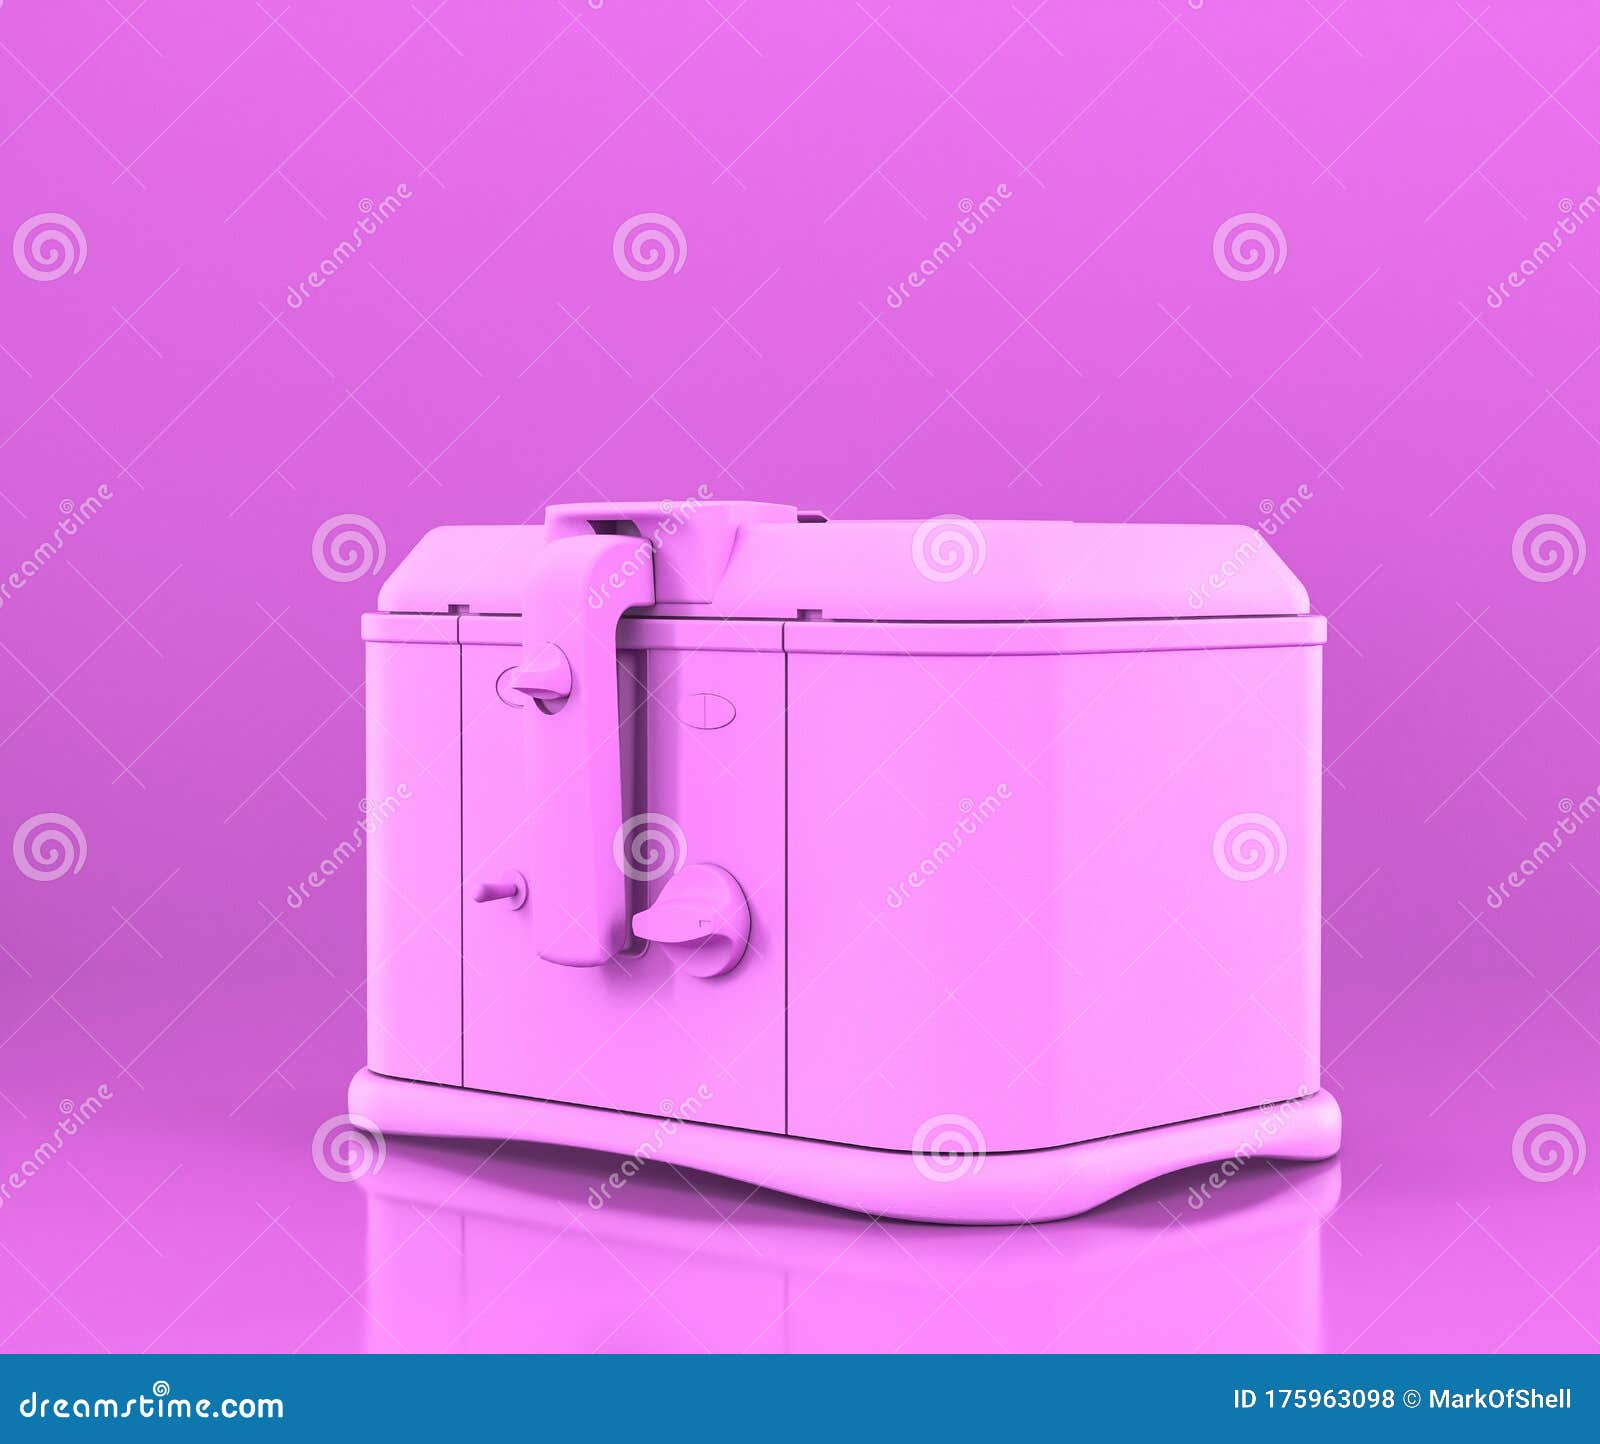 Deep Fryer, Small Kitchen Appliances in Flat Pink Color, Single